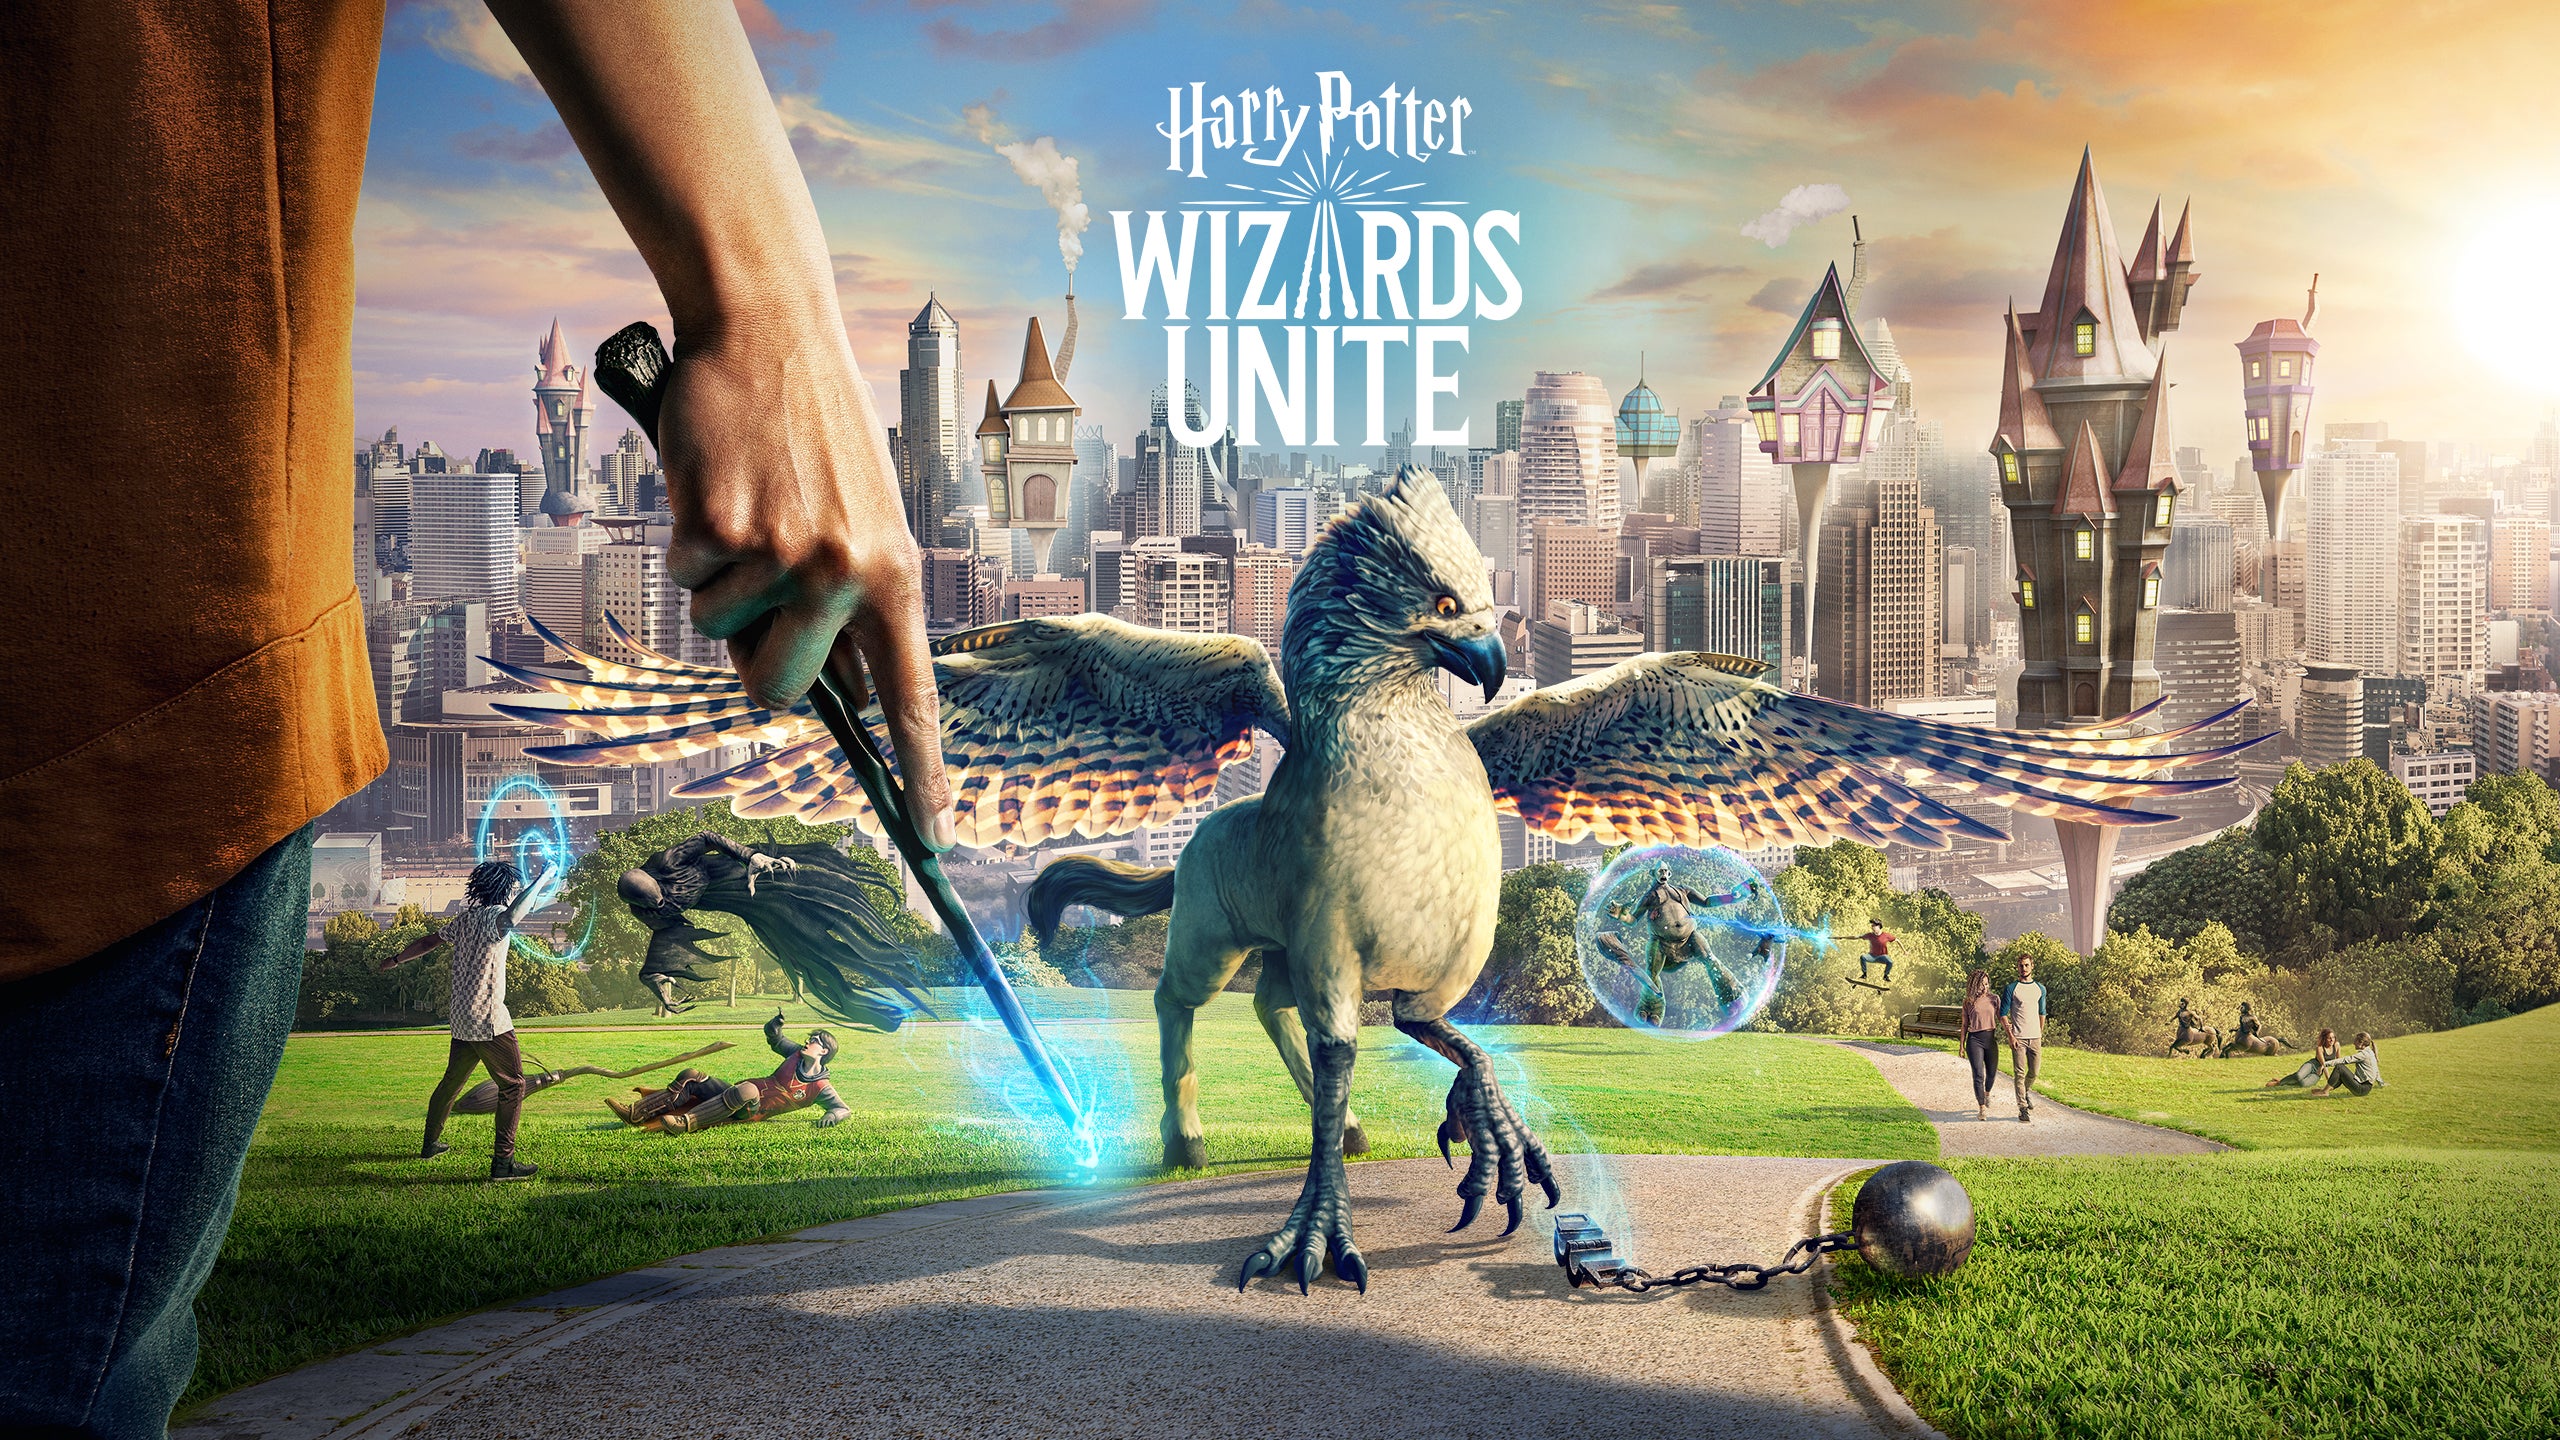 Image for Next month, Harry Potter: Wizards Unite players will be able to earn more XP and spell energy at these retail stores